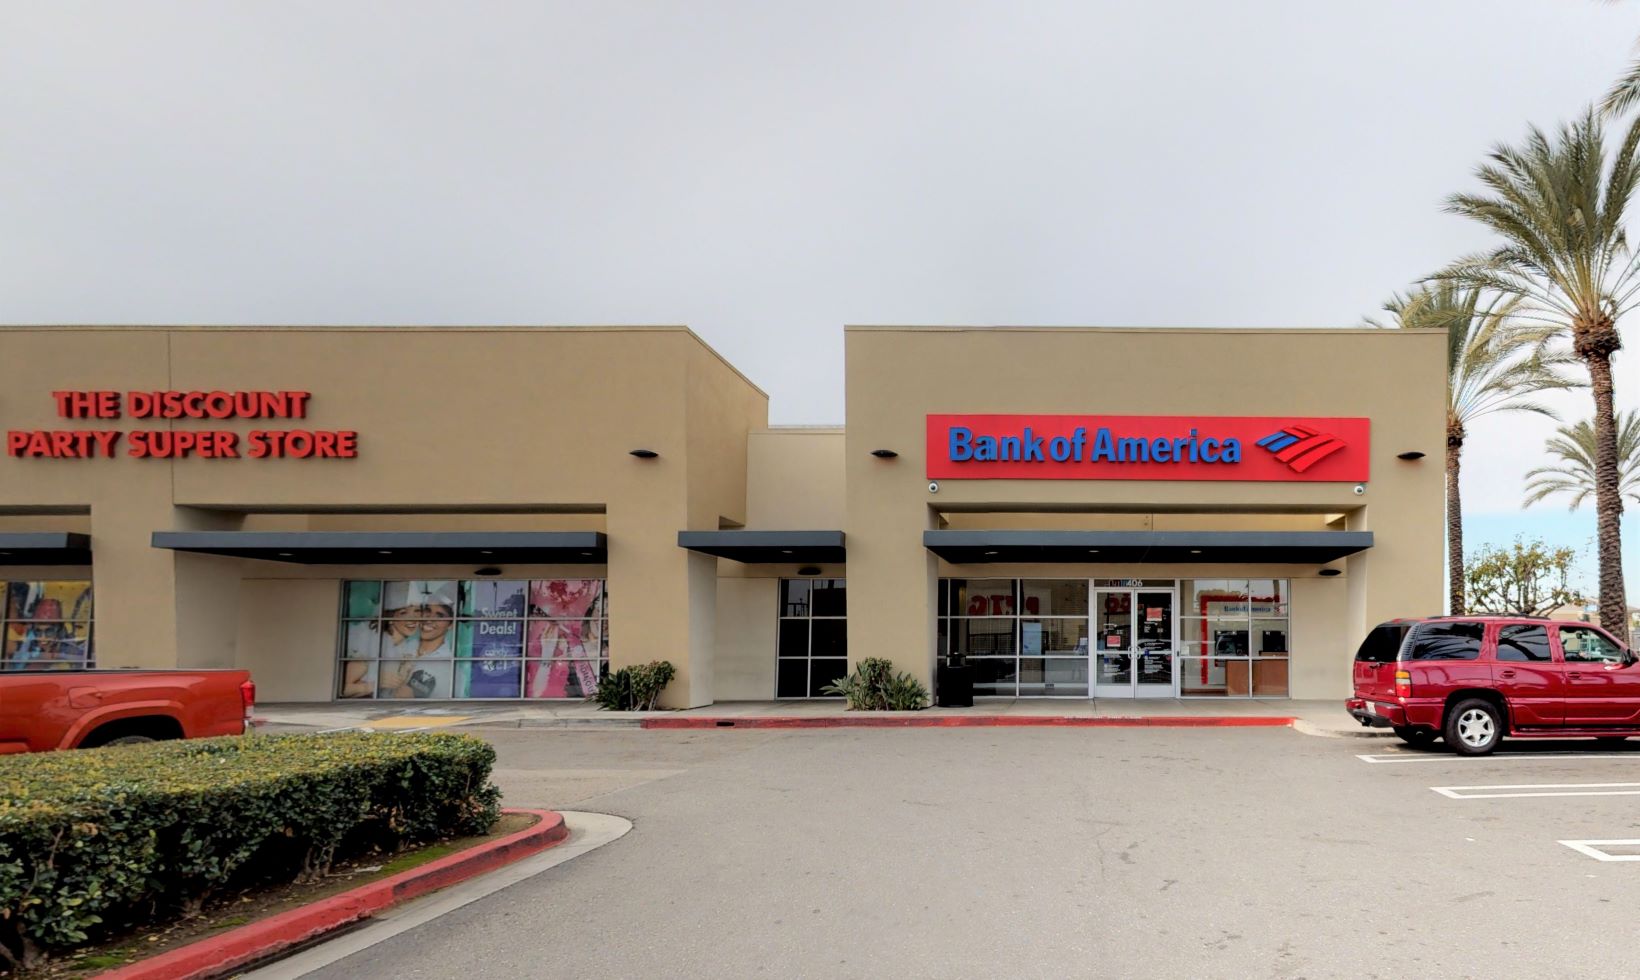 Bank of America financial center with walk-up ATM | 406 N Euclid St, Anaheim, CA 92801